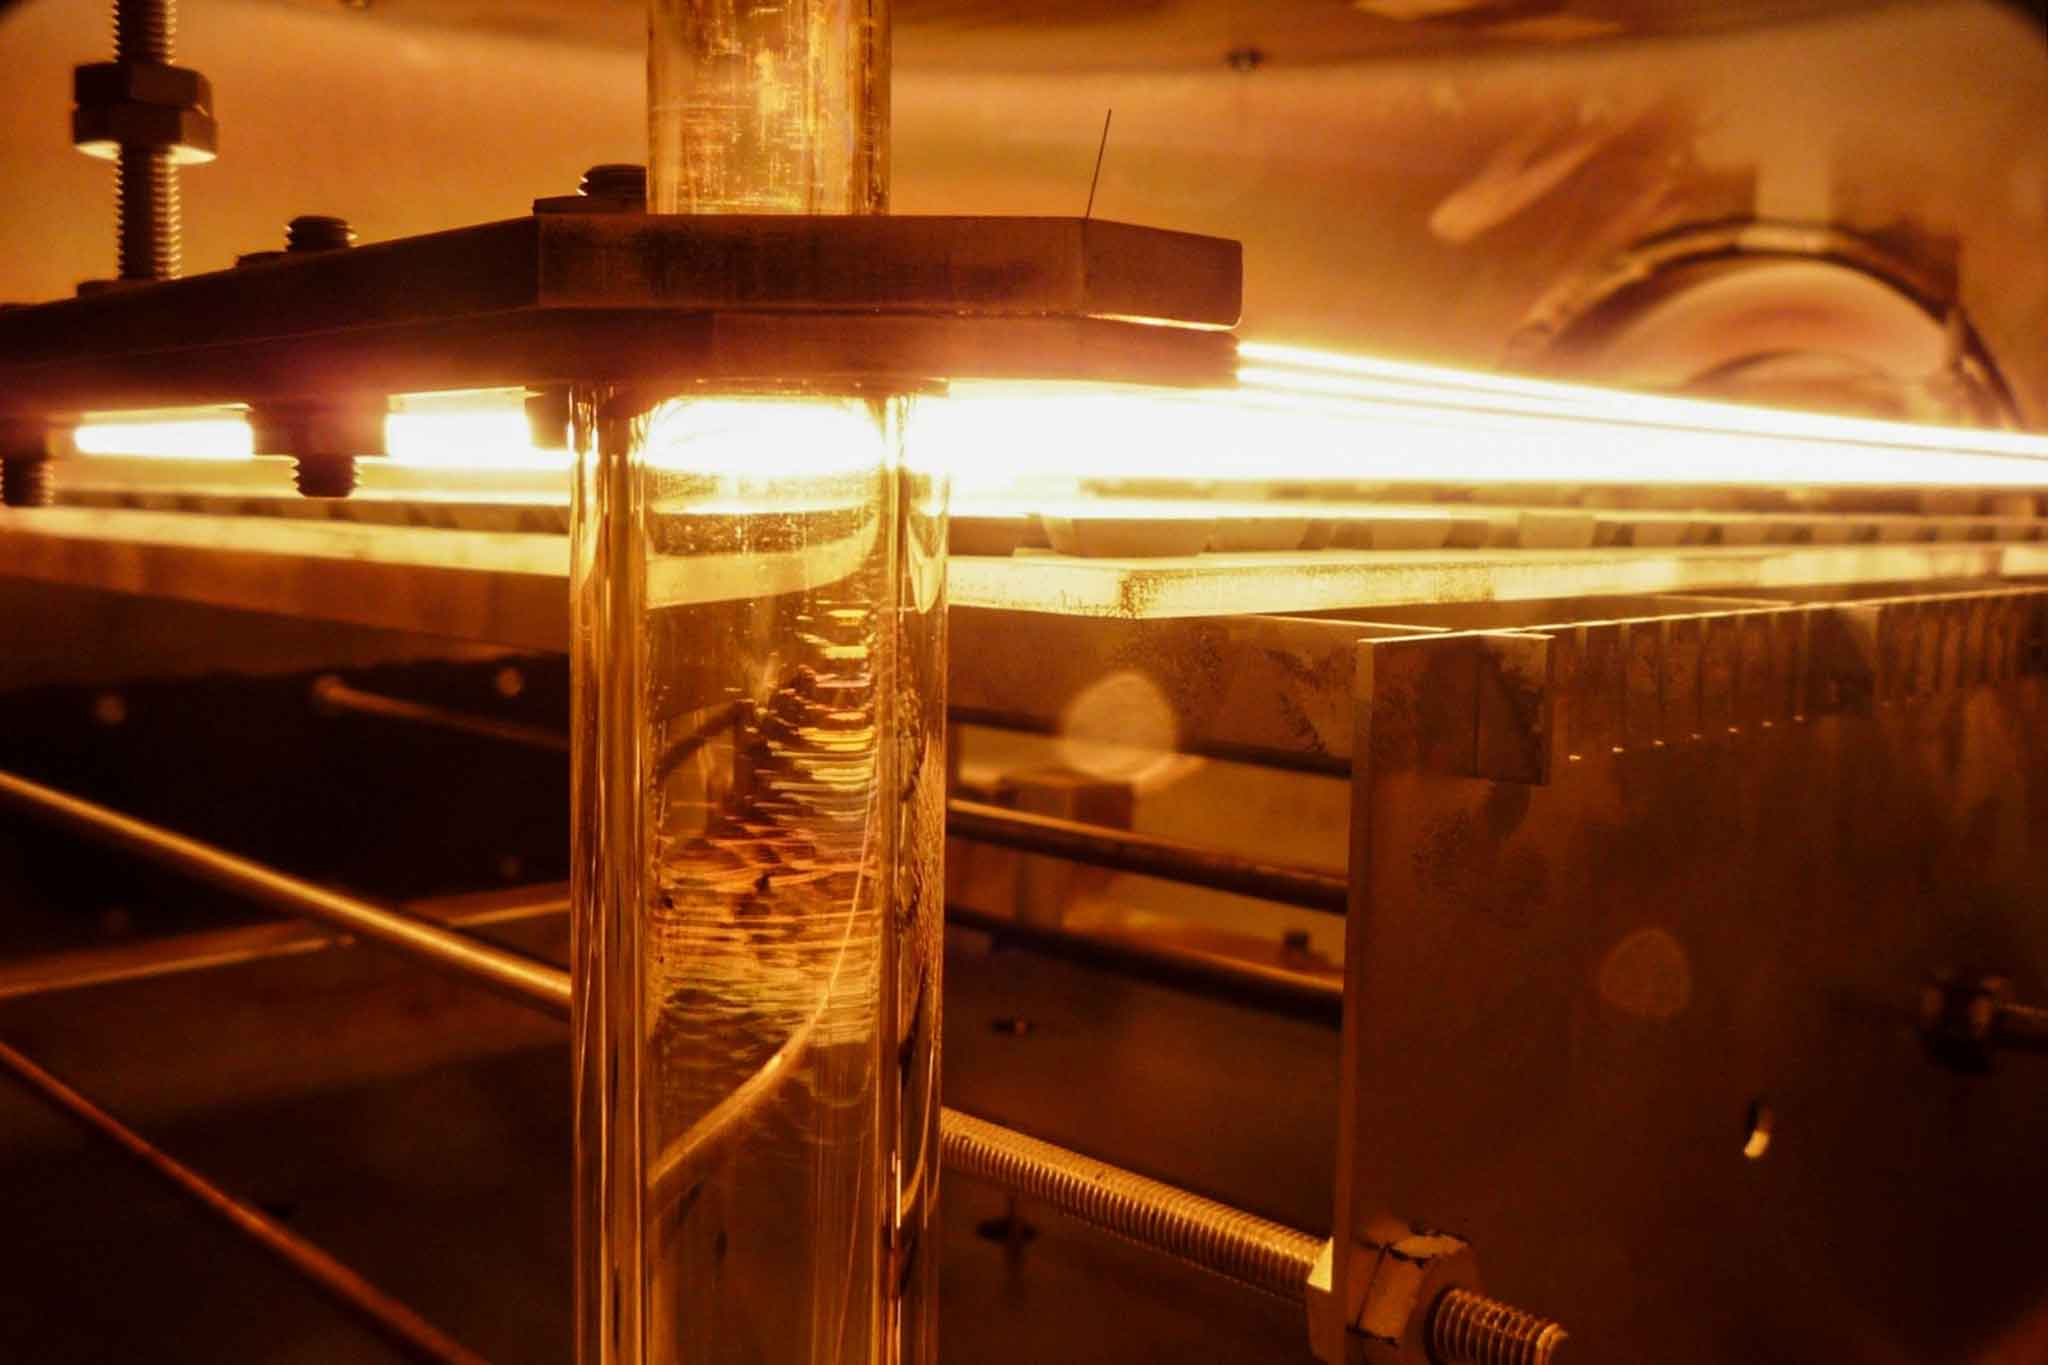 Inside view of a reactor during the HF CVD coating process.